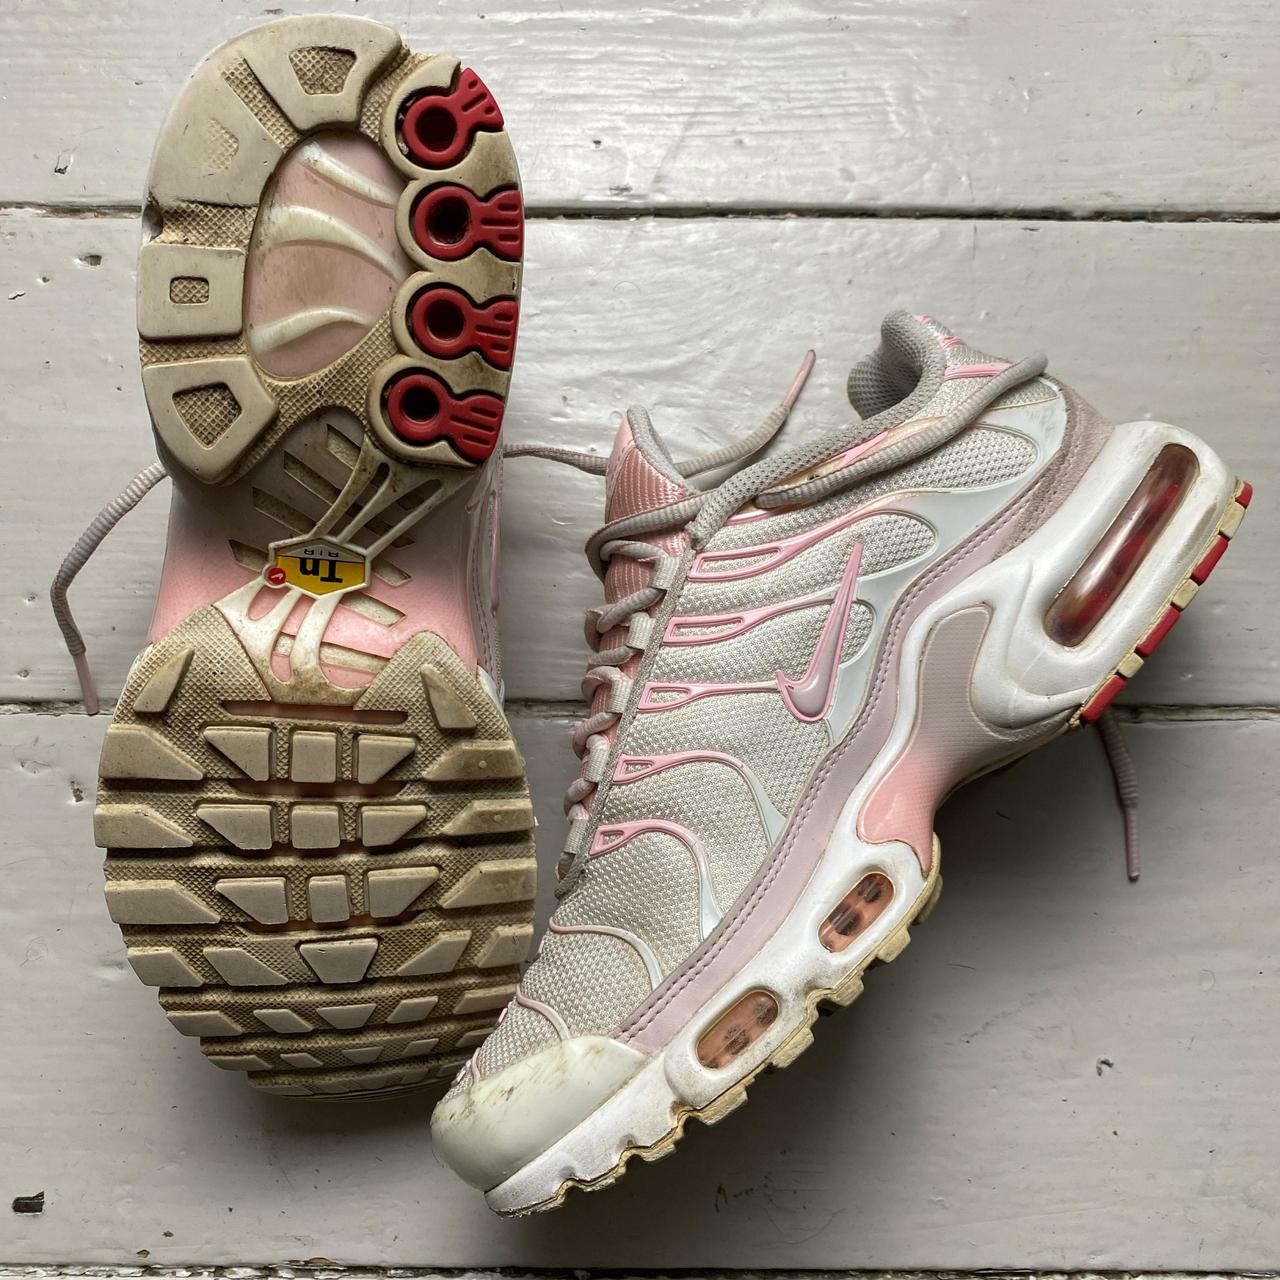 Nike TN Air Max Plus Pink and White